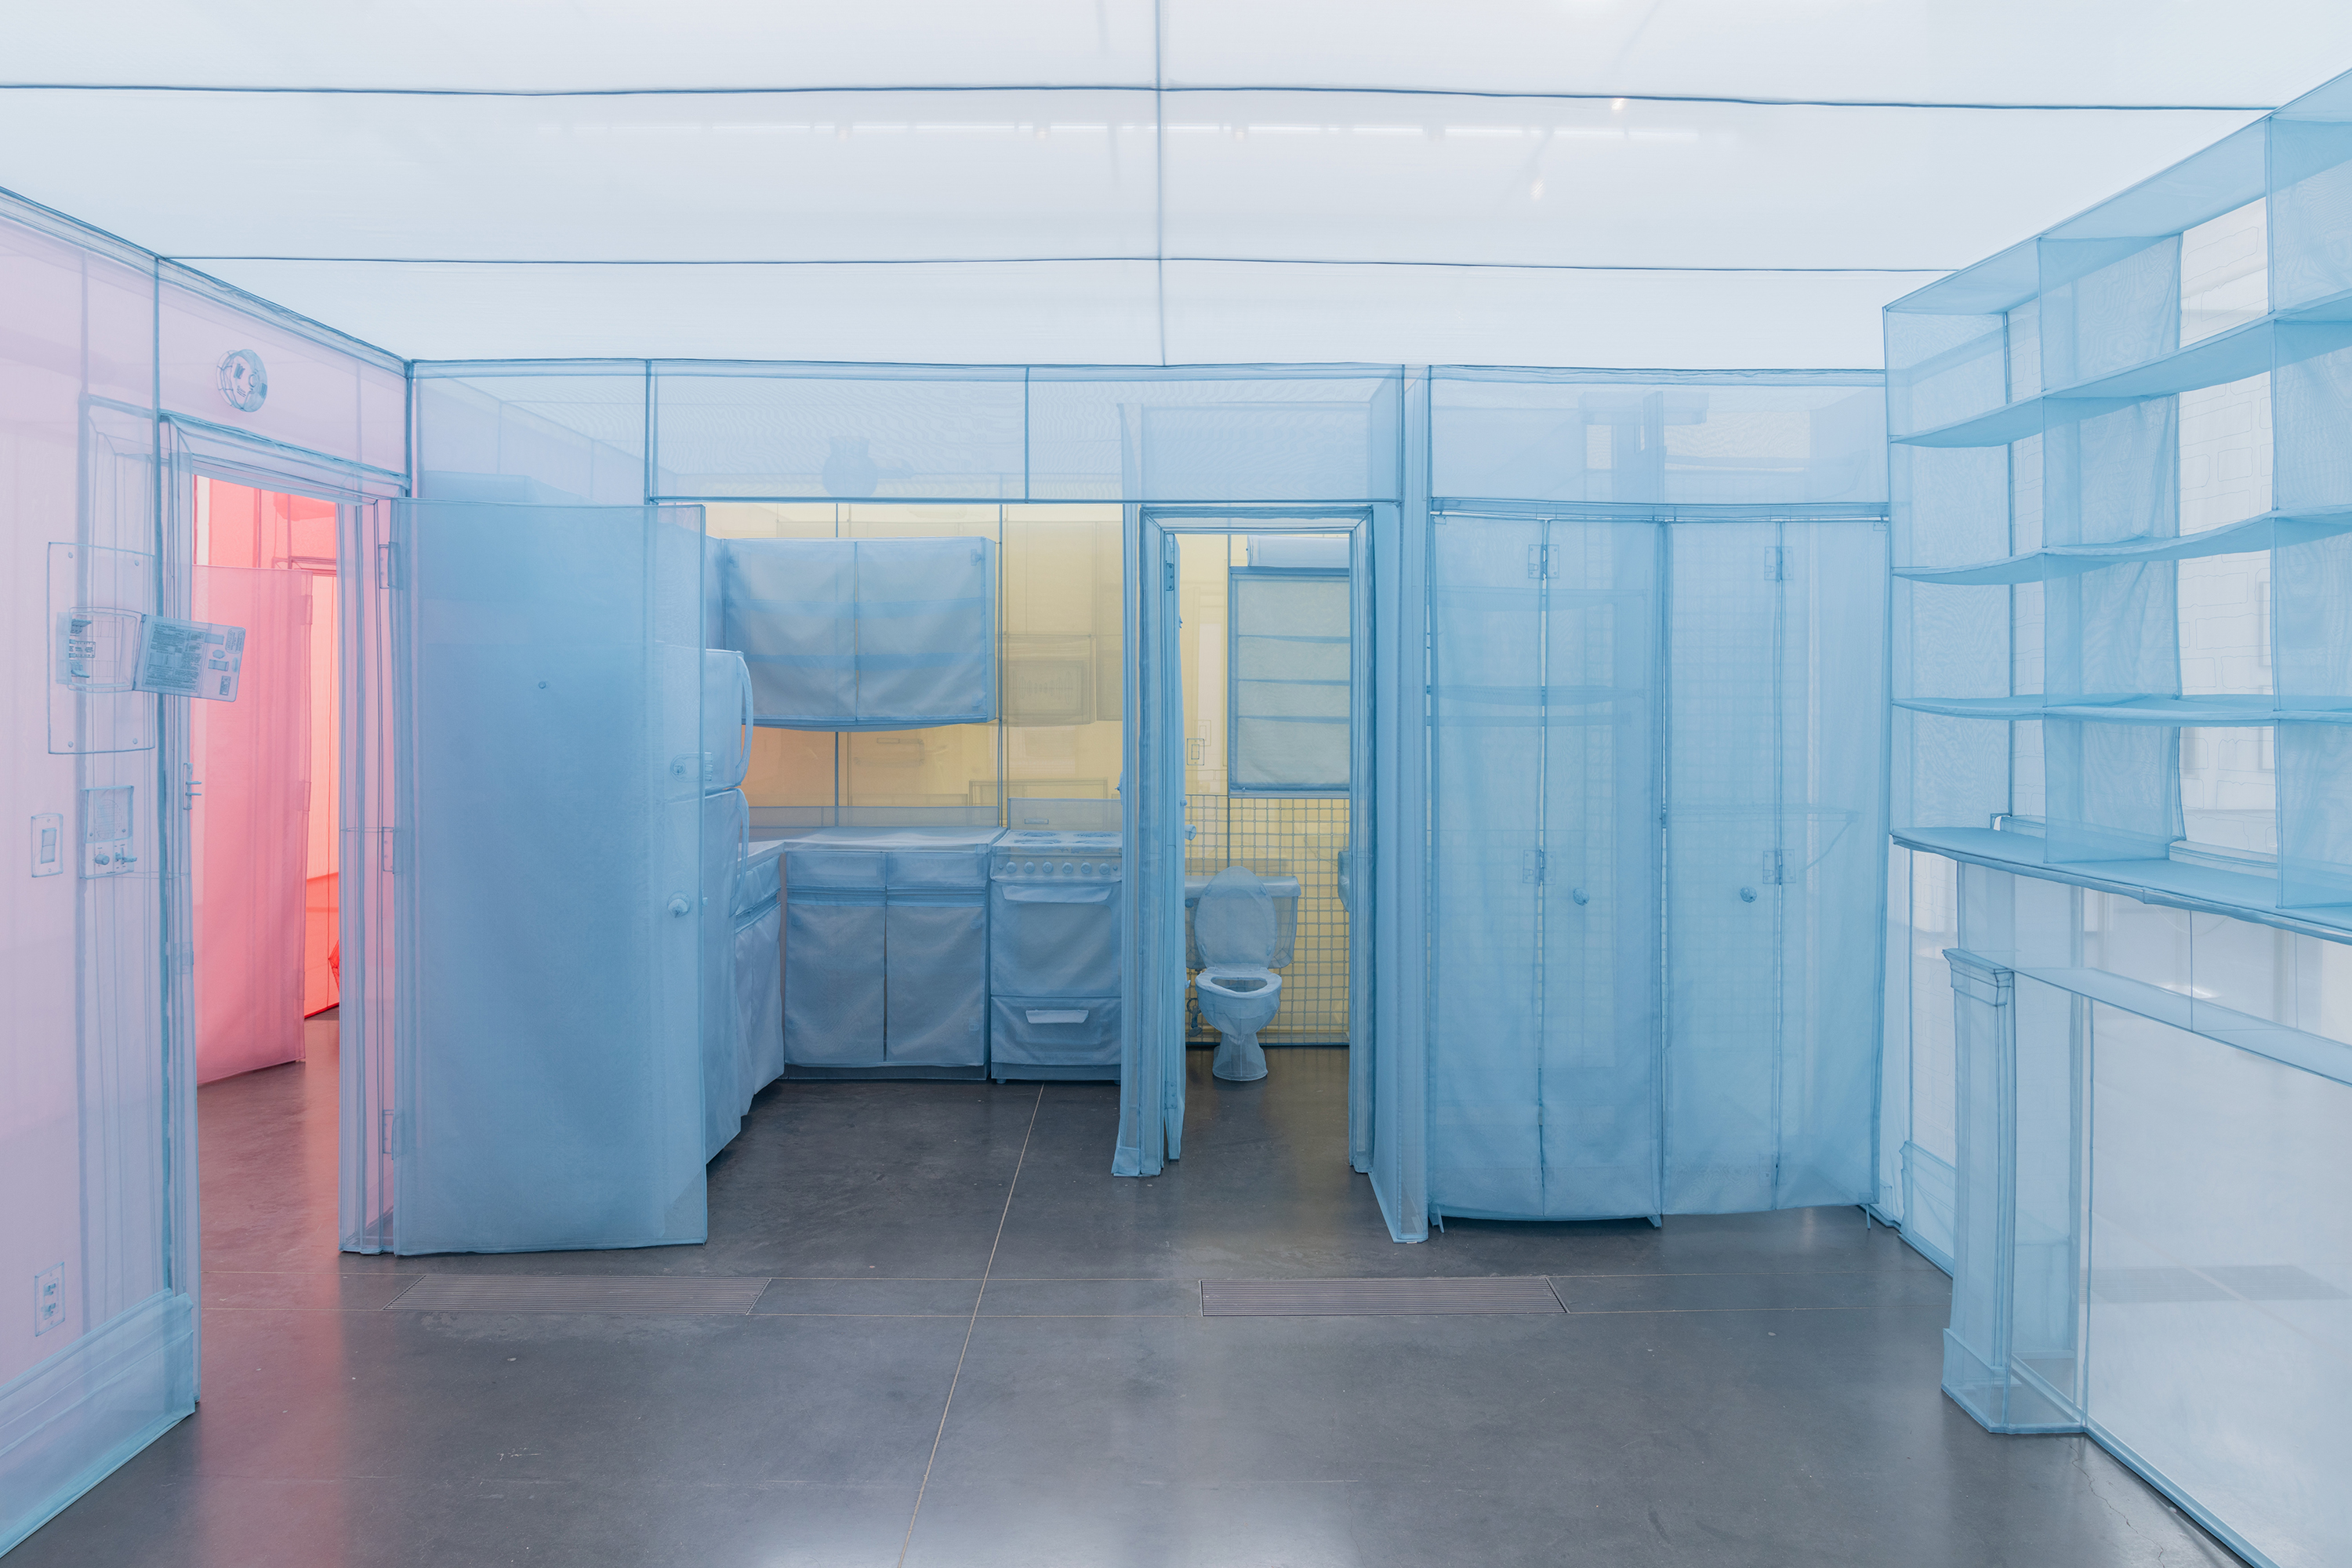 Do Ho Suh, 348 West 22nd Street, Apartment A, Unit-2, Corridor and Staircase (detail), 2011–15, Los Angeles County Museum of Art, anonymous gift, installation view, Do Ho Suh: 348 West 22nd Street, Los Angeles County Museum of Art, 2019–2020, © Do Ho Suh, photo © Museum Associates/LACMA